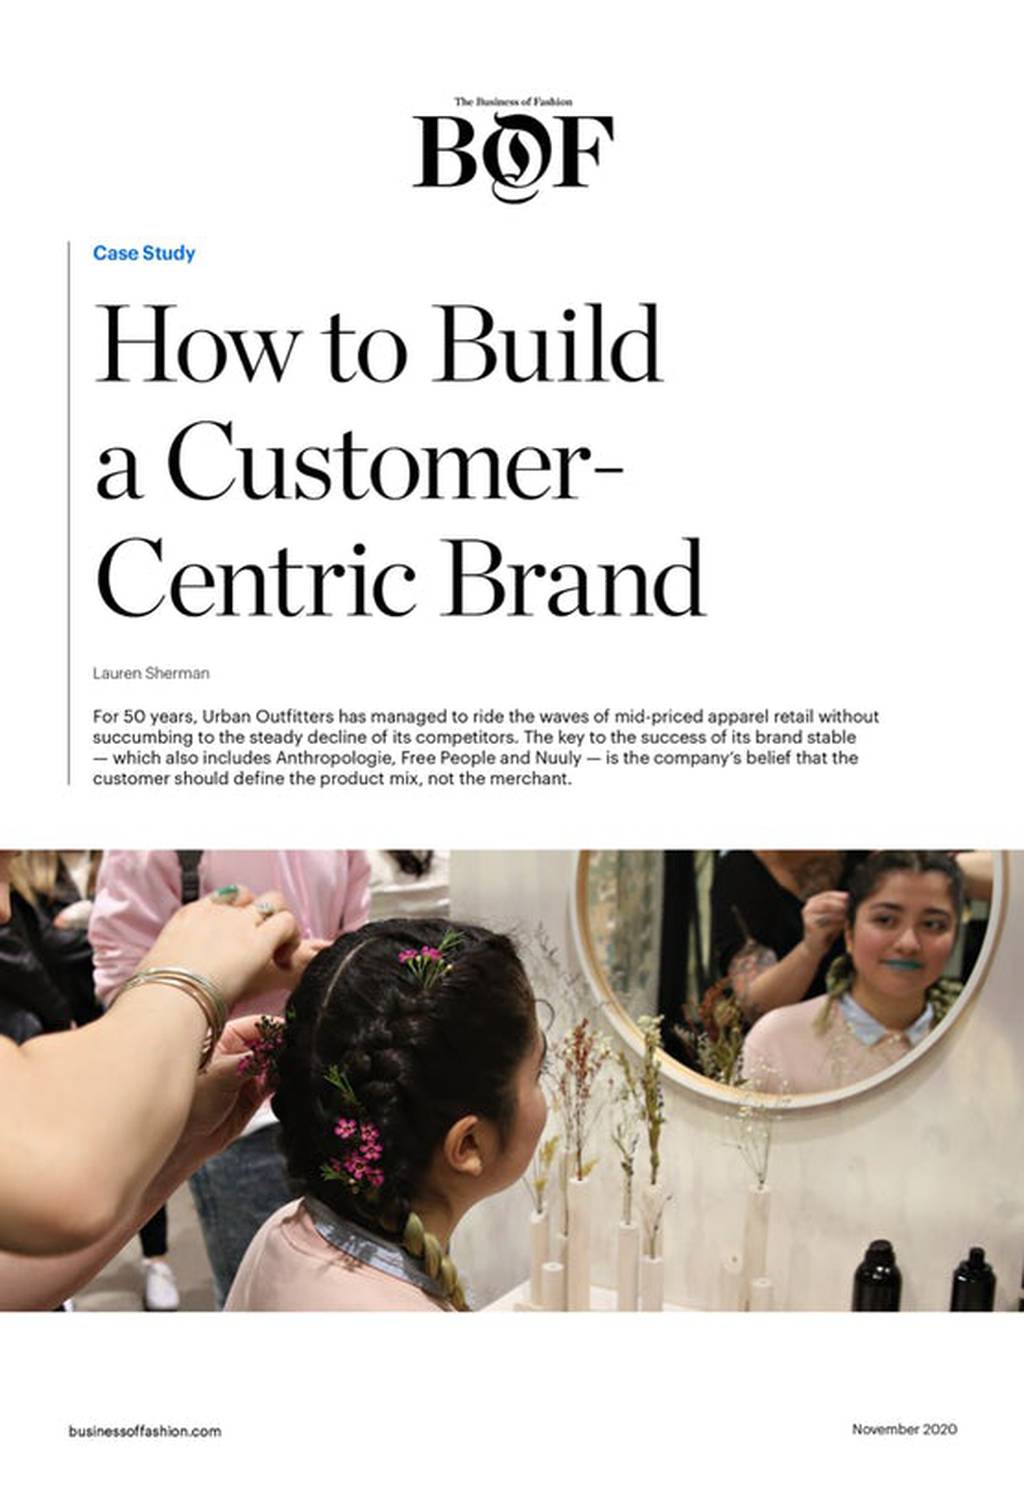 How to Build a Customer-Centric Brand